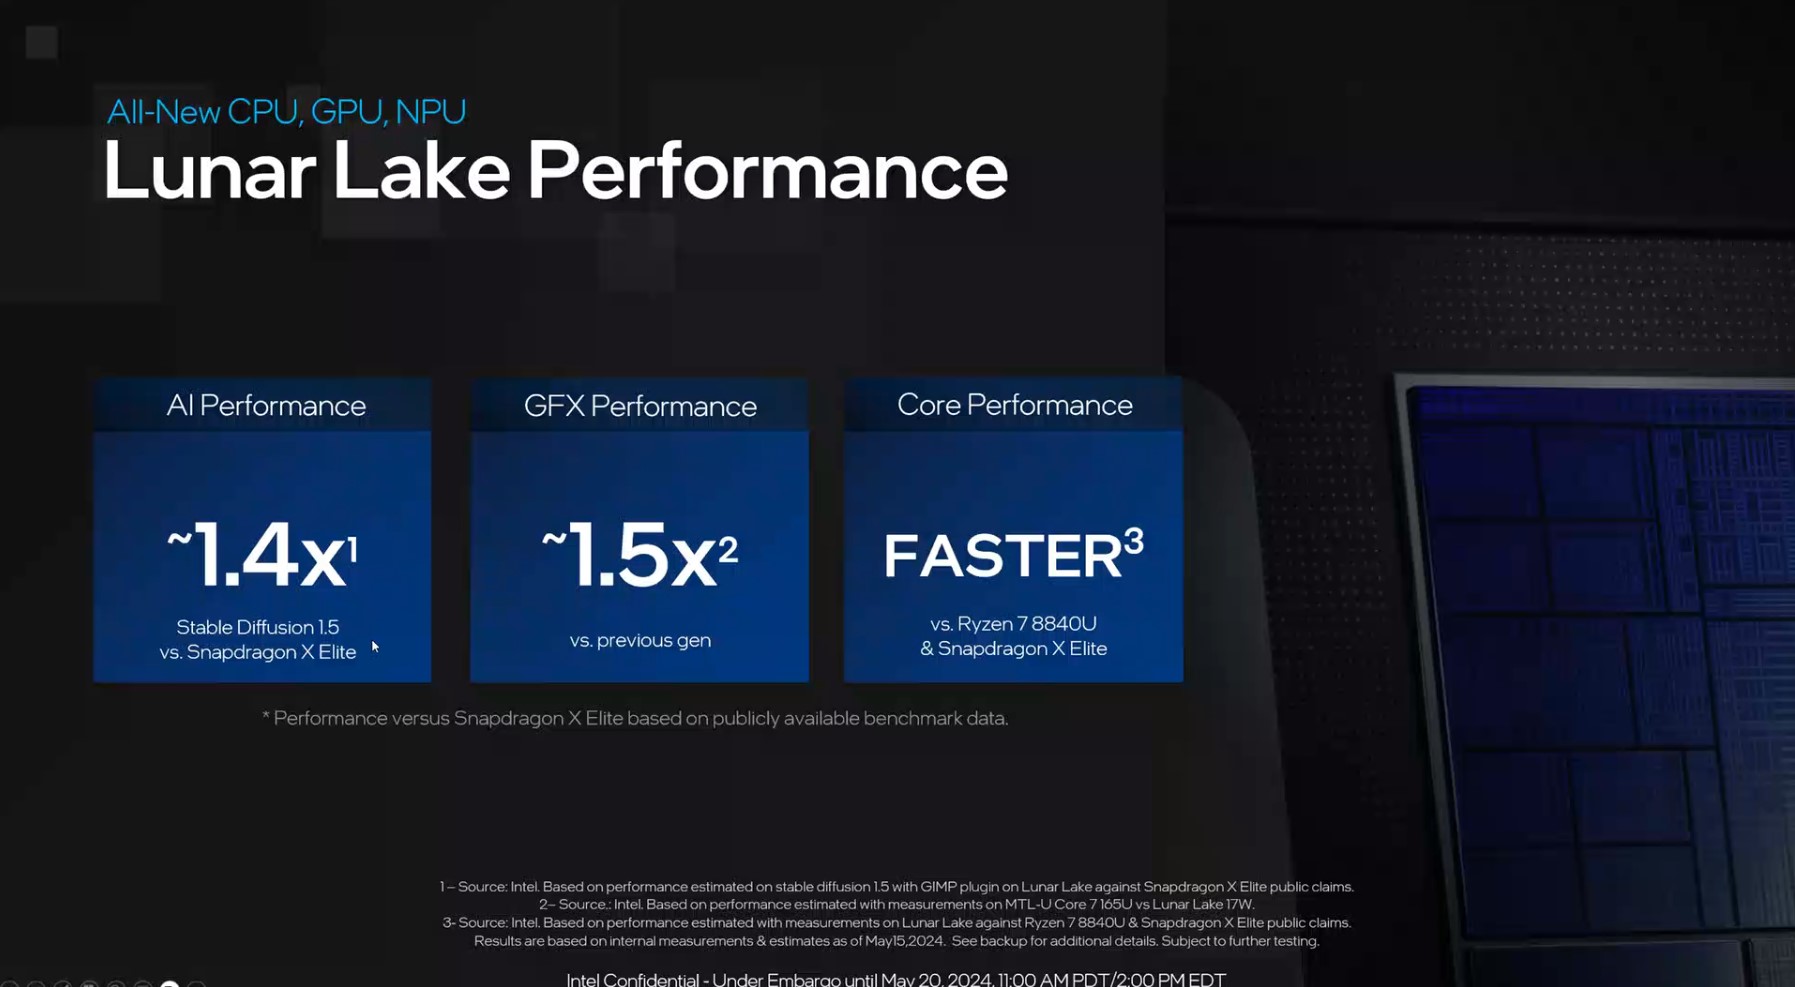 Performance claims for Intel's Lunar Lake CPU.